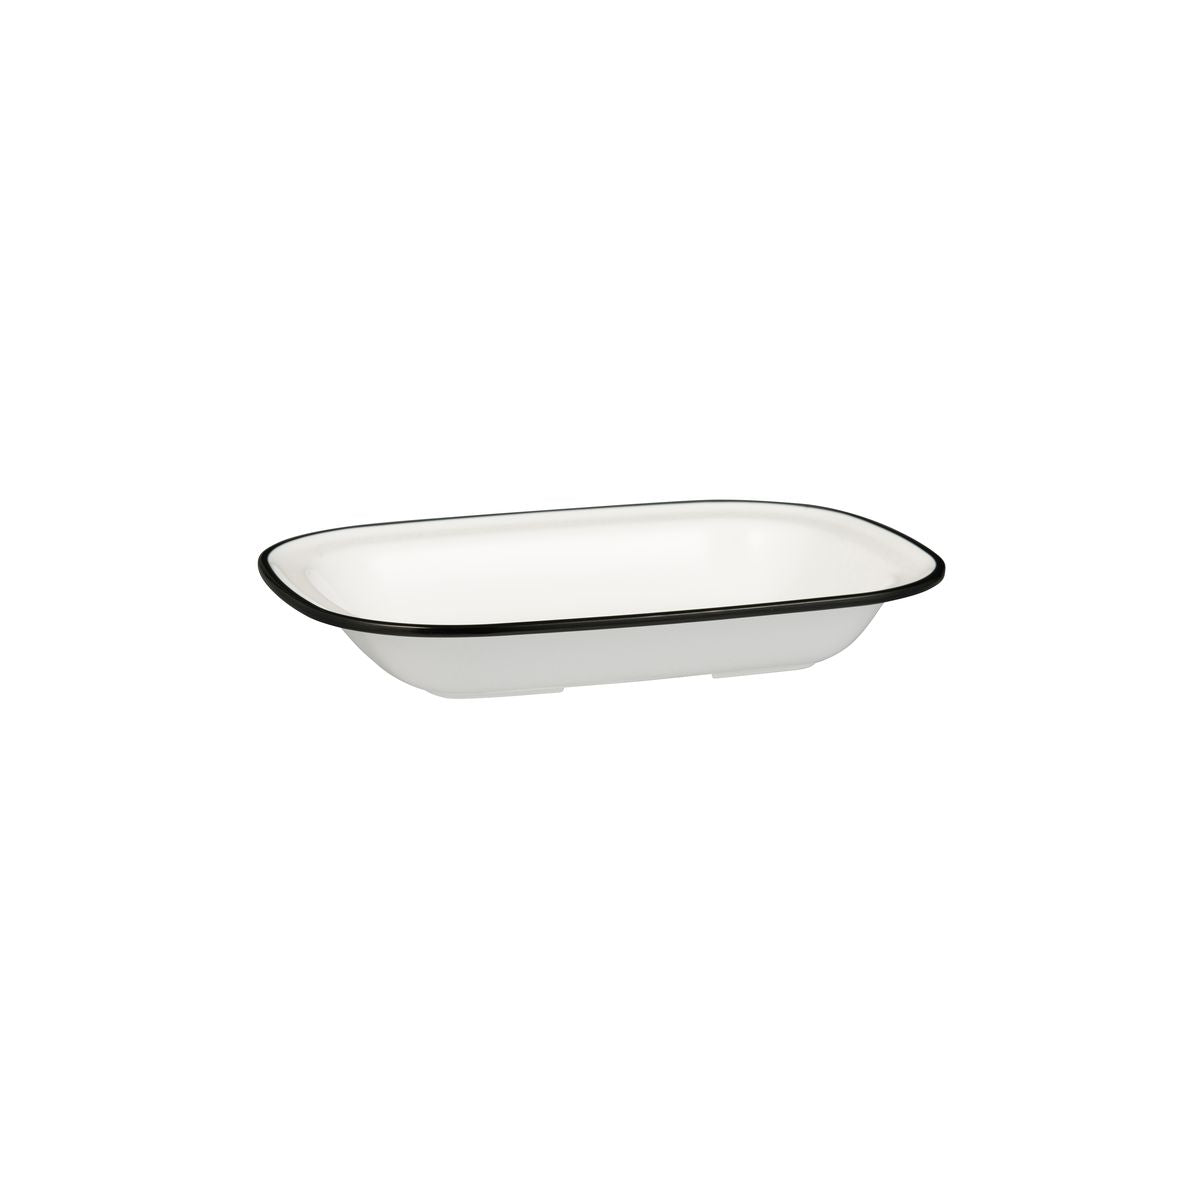 Rectangular Dish, 230 x 176 x 45mm, Melamine - White & Black from Ryner Melamine. Sold in boxes of 12. Hospitality quality at wholesale price with The Flying Fork! 